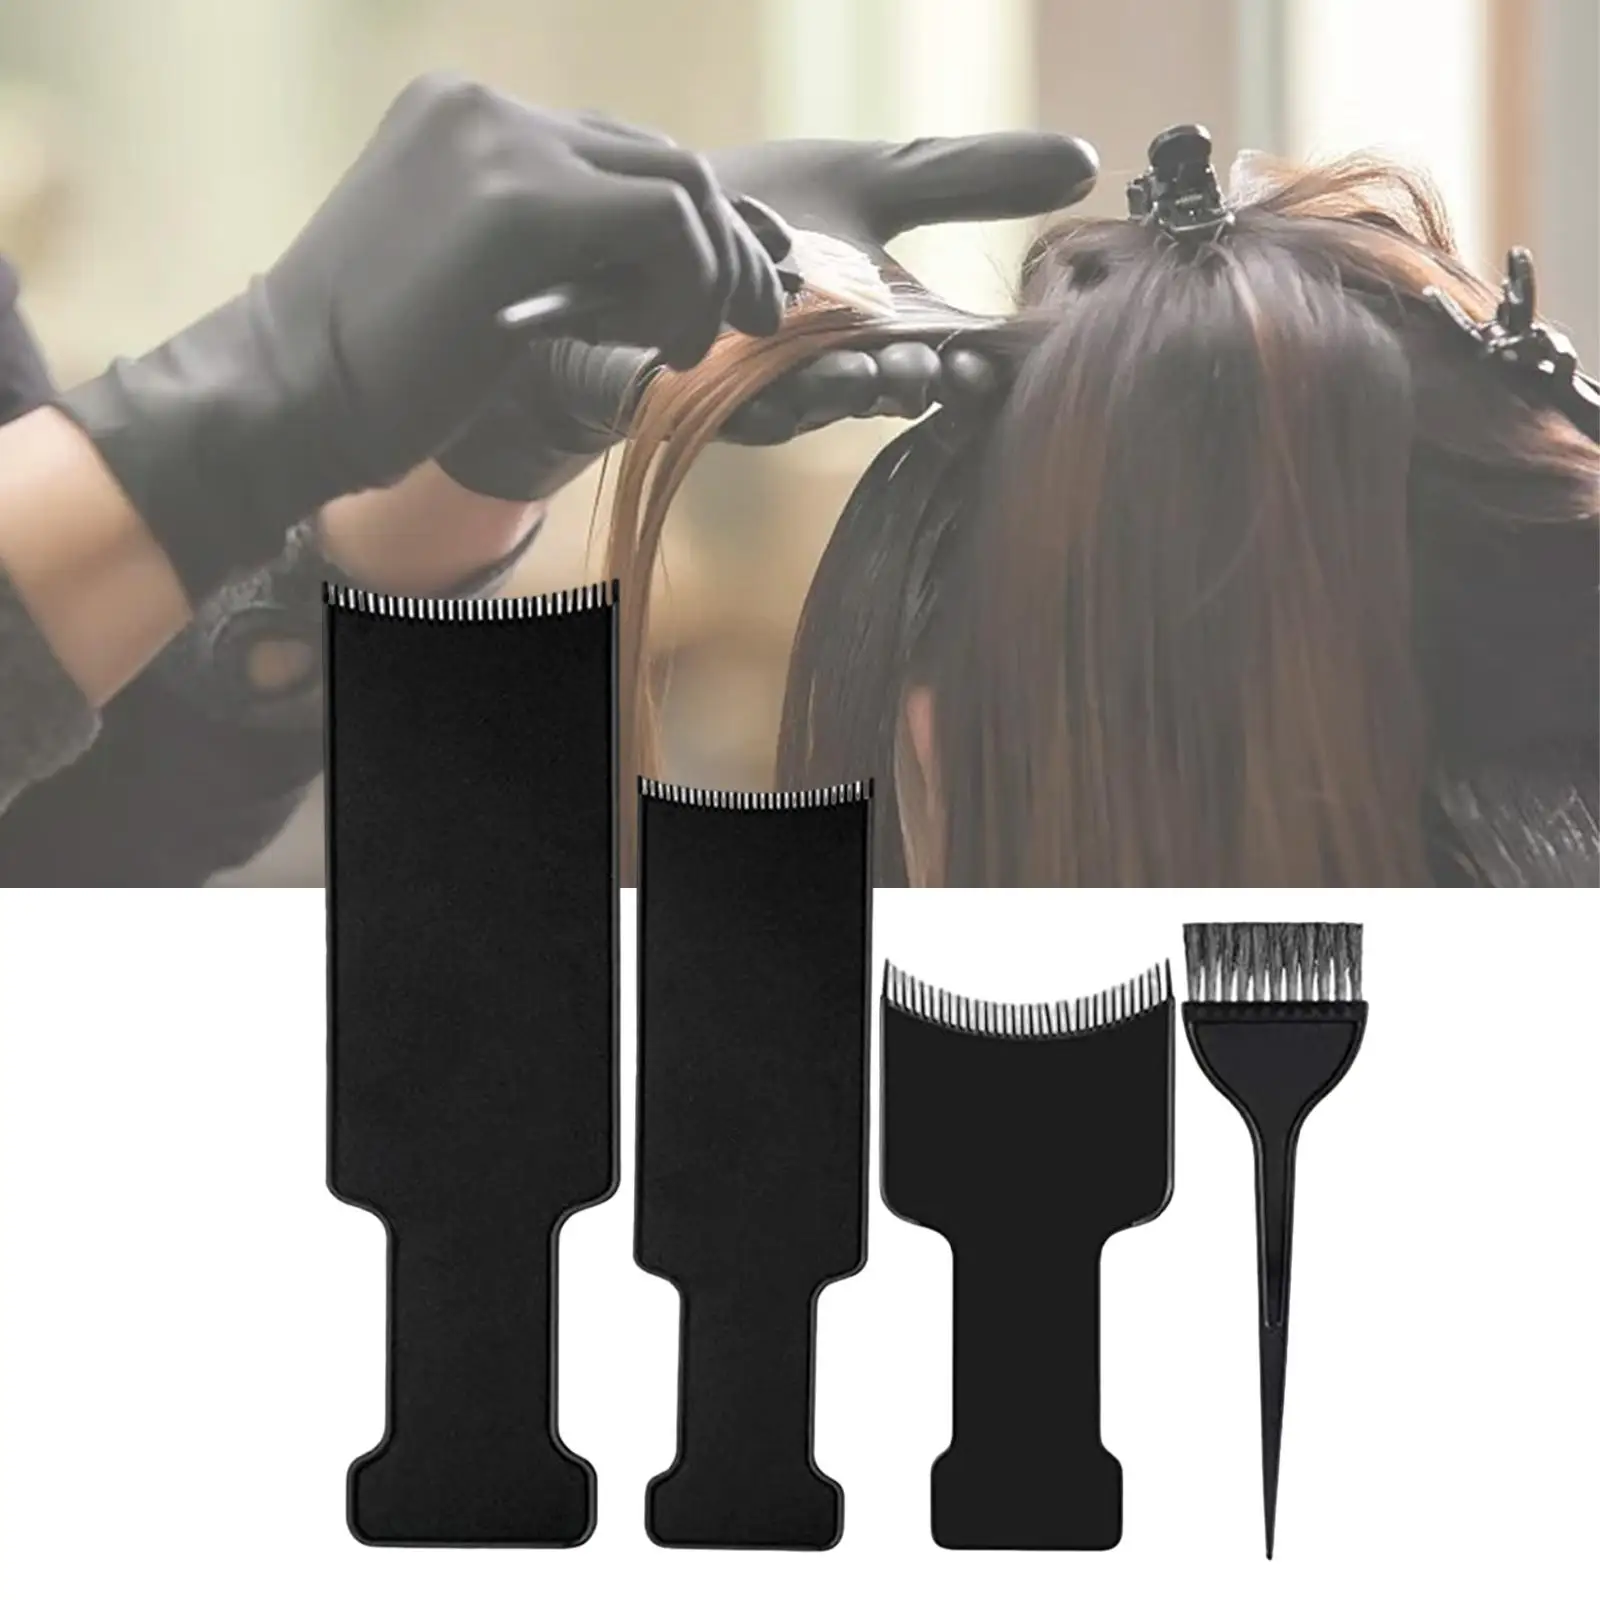 Hair Coloring Board Lightweight Tint DIY Tool Easy to Use Beauty Tool Coloring Comb for Home Highlighting Salon Shop Hairdresser